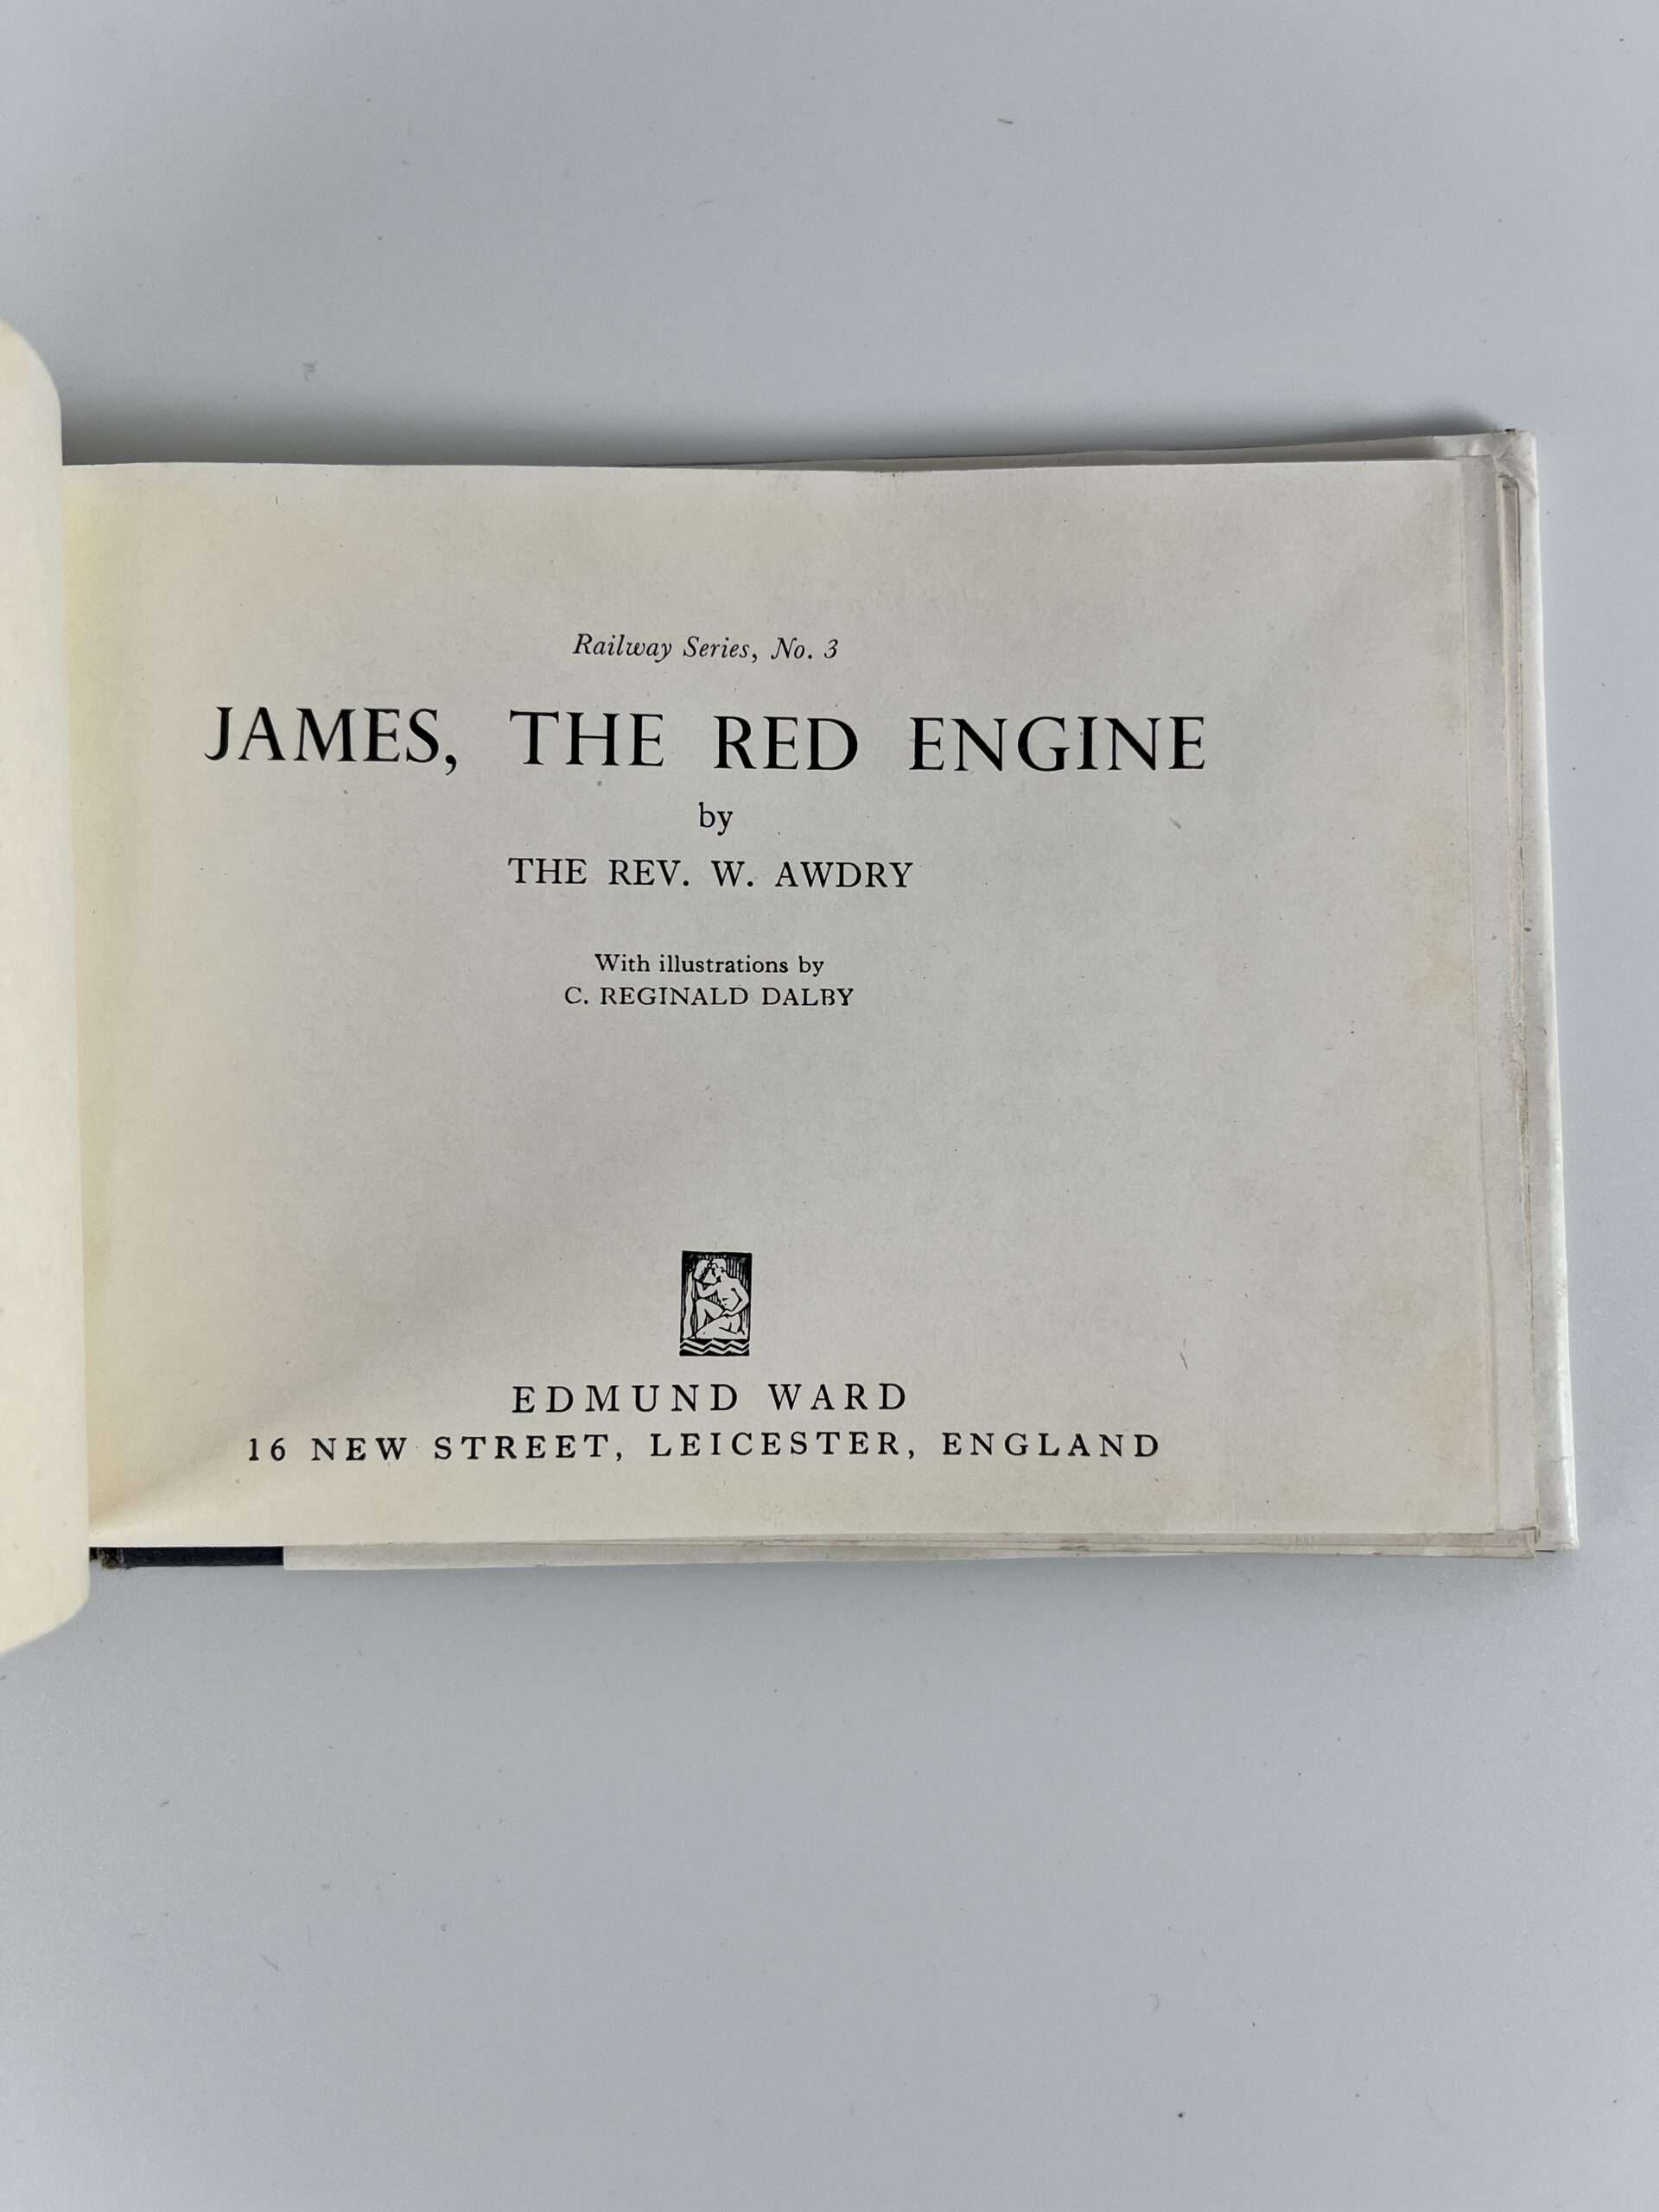 rw awdry james the red engine first ed2